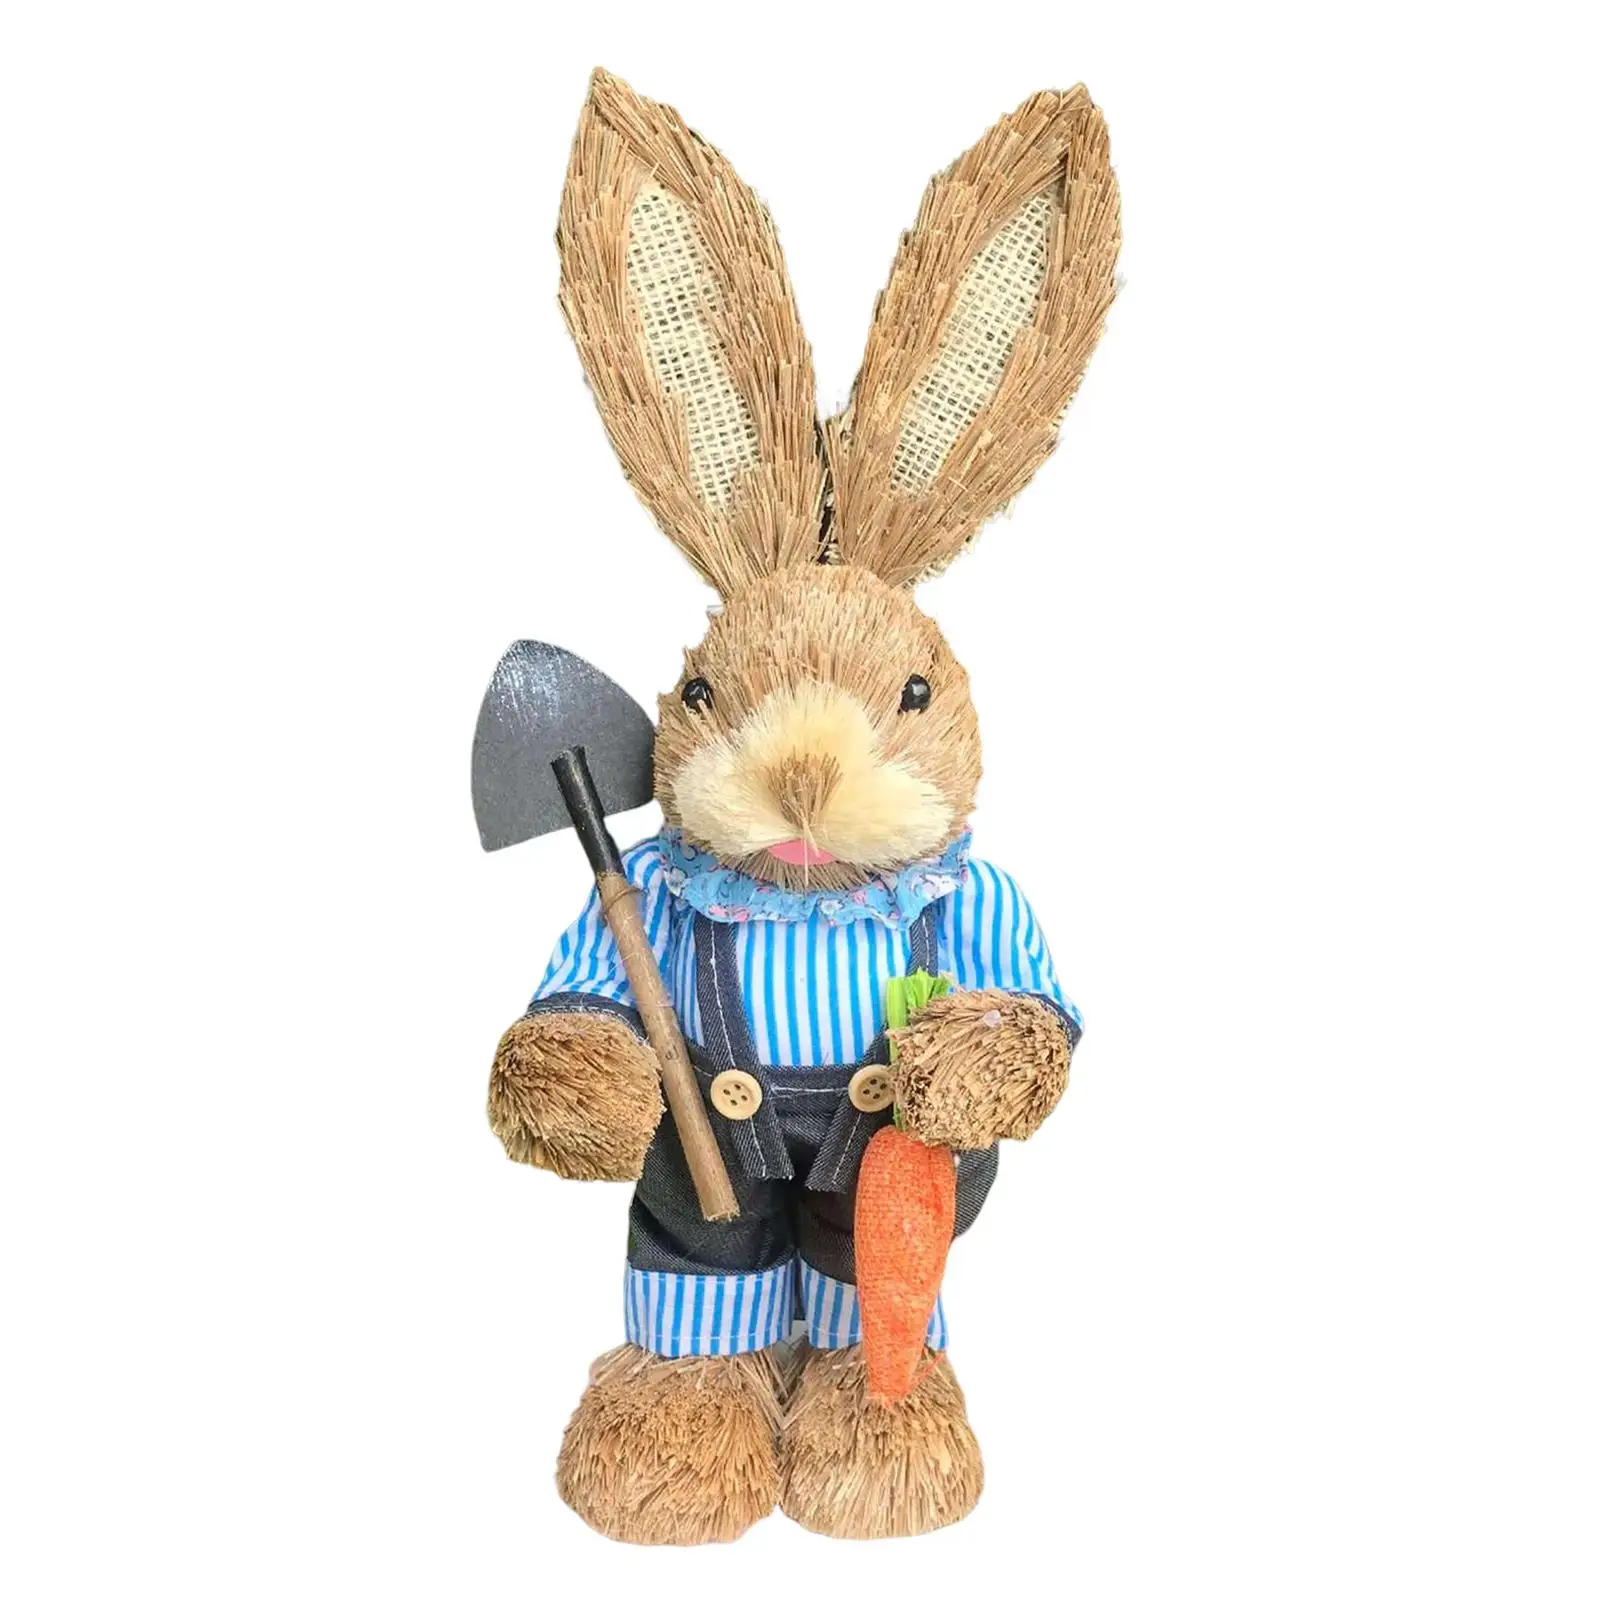 Straw Bunny Figurine Statue Artificial Animal Model Sculpture Doll Easter Decoration for Office Table Party